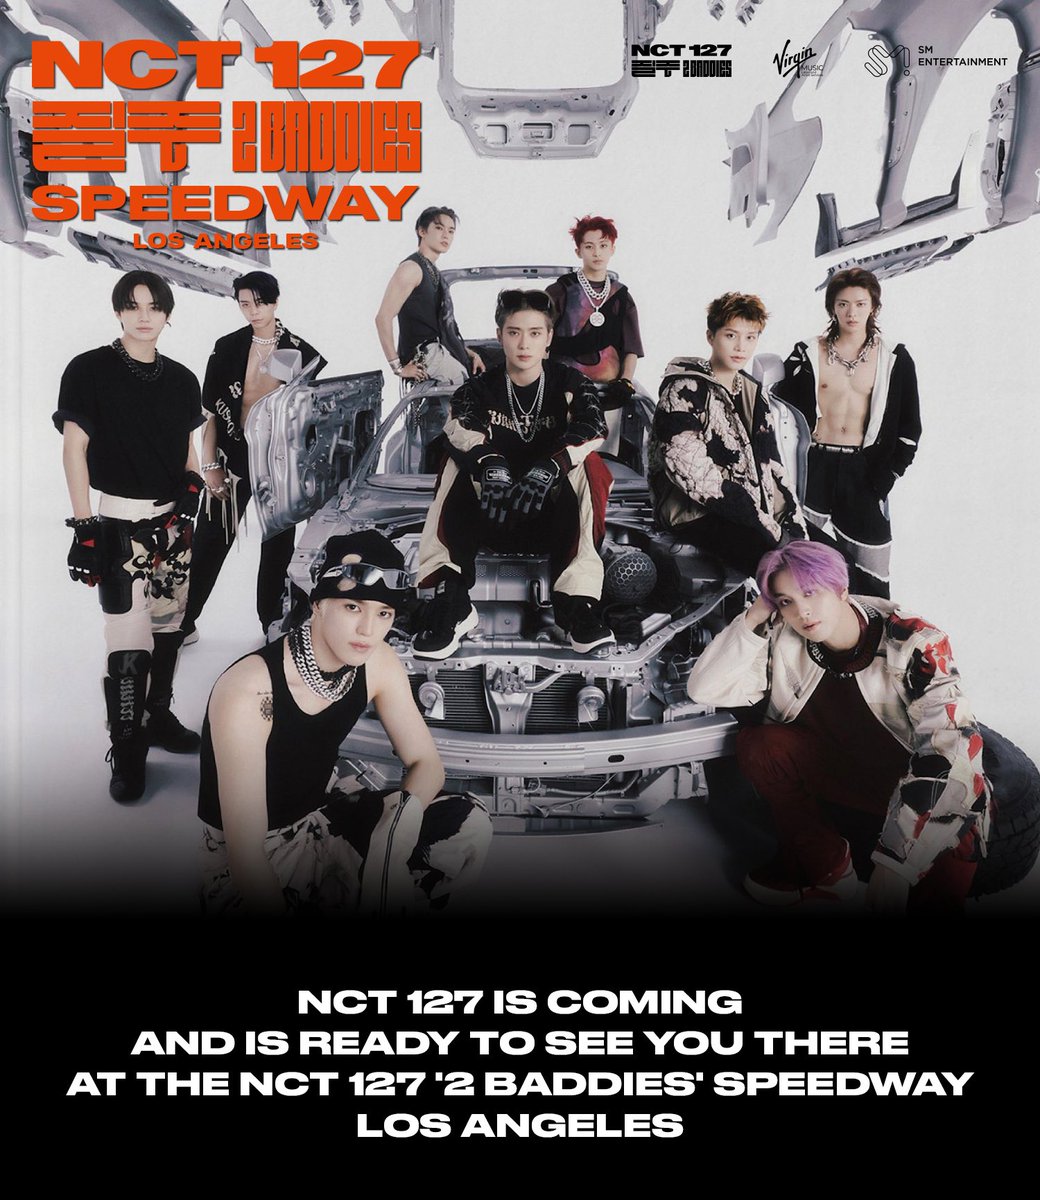 Image for YES, you heard it here! NCT 127 will be there at the SPEEDWAY tomorrow! 🤩 Tune in and listen as they answer some of your questions! 💬 HERE's some important info for the event! - Lines will cutoff at 7PM - A Valid ID is needed to enter the event https://t.co/fGrw6WCjP5